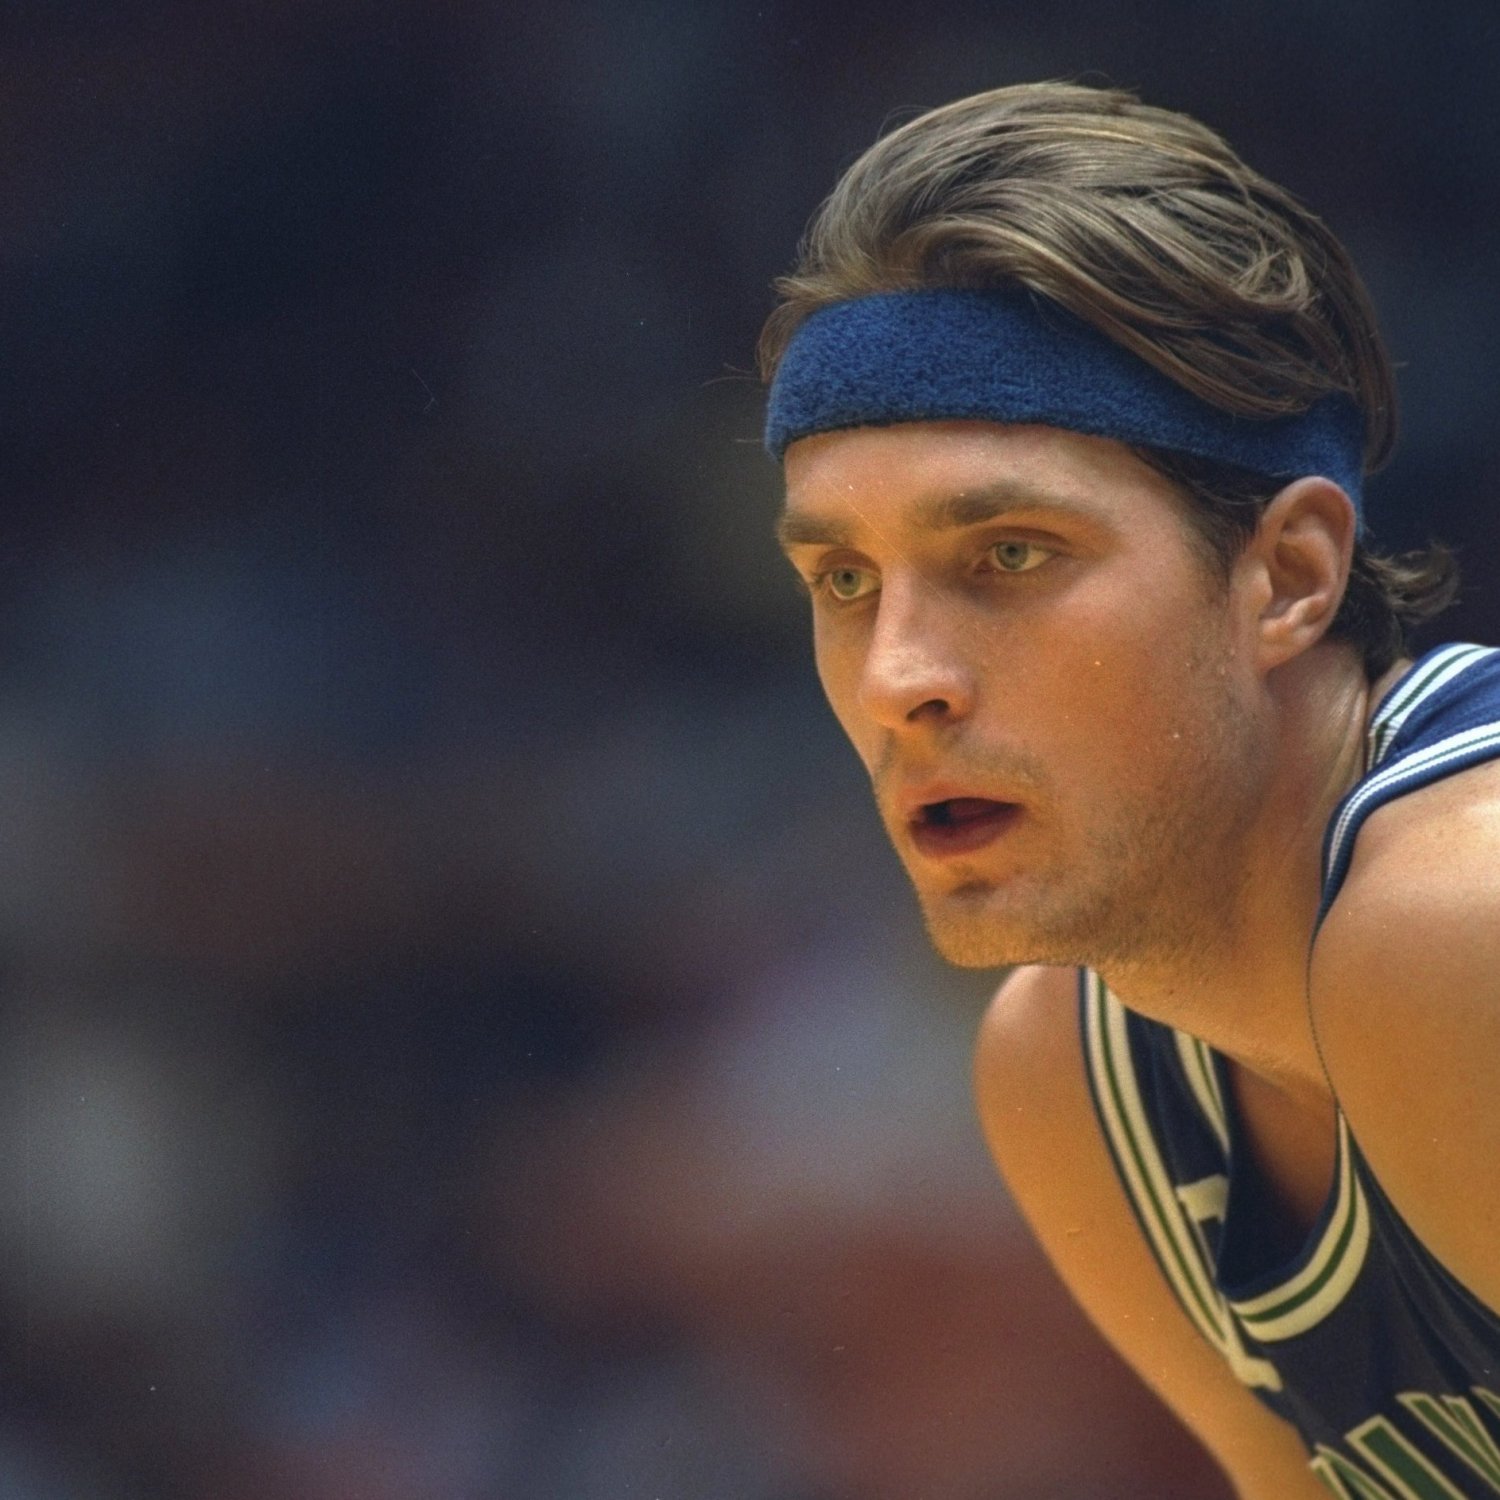 5 Surprising Things We Know About Christian Laettner | Bleacher Report